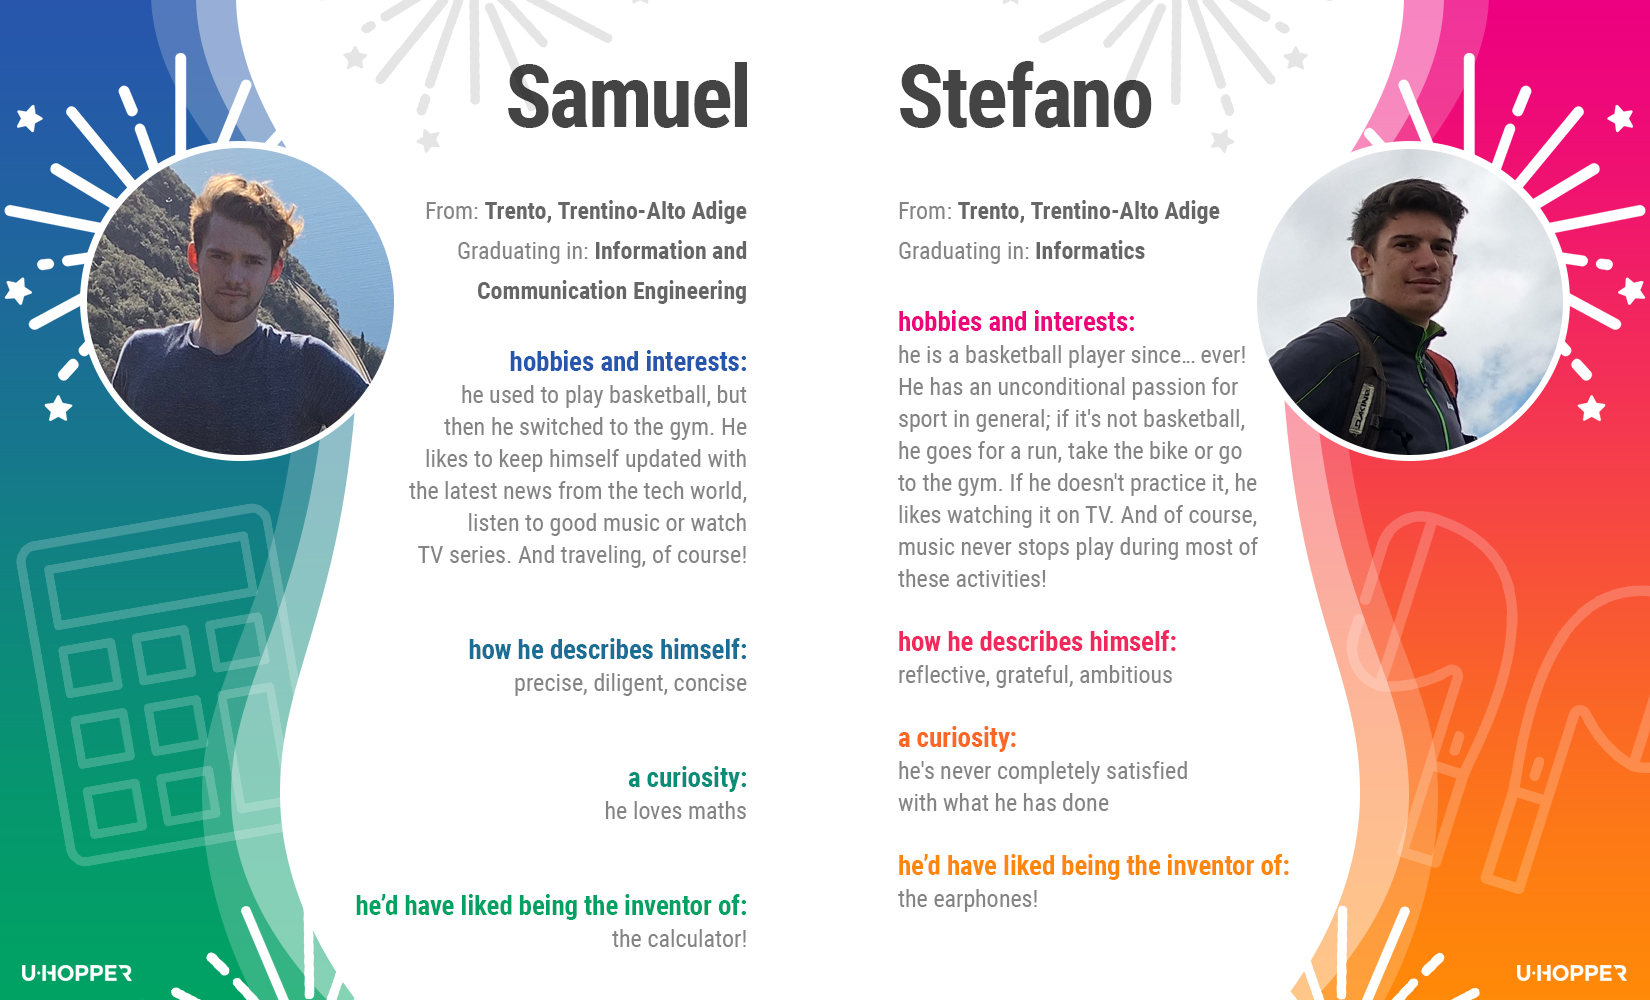 Samuel and Stefano